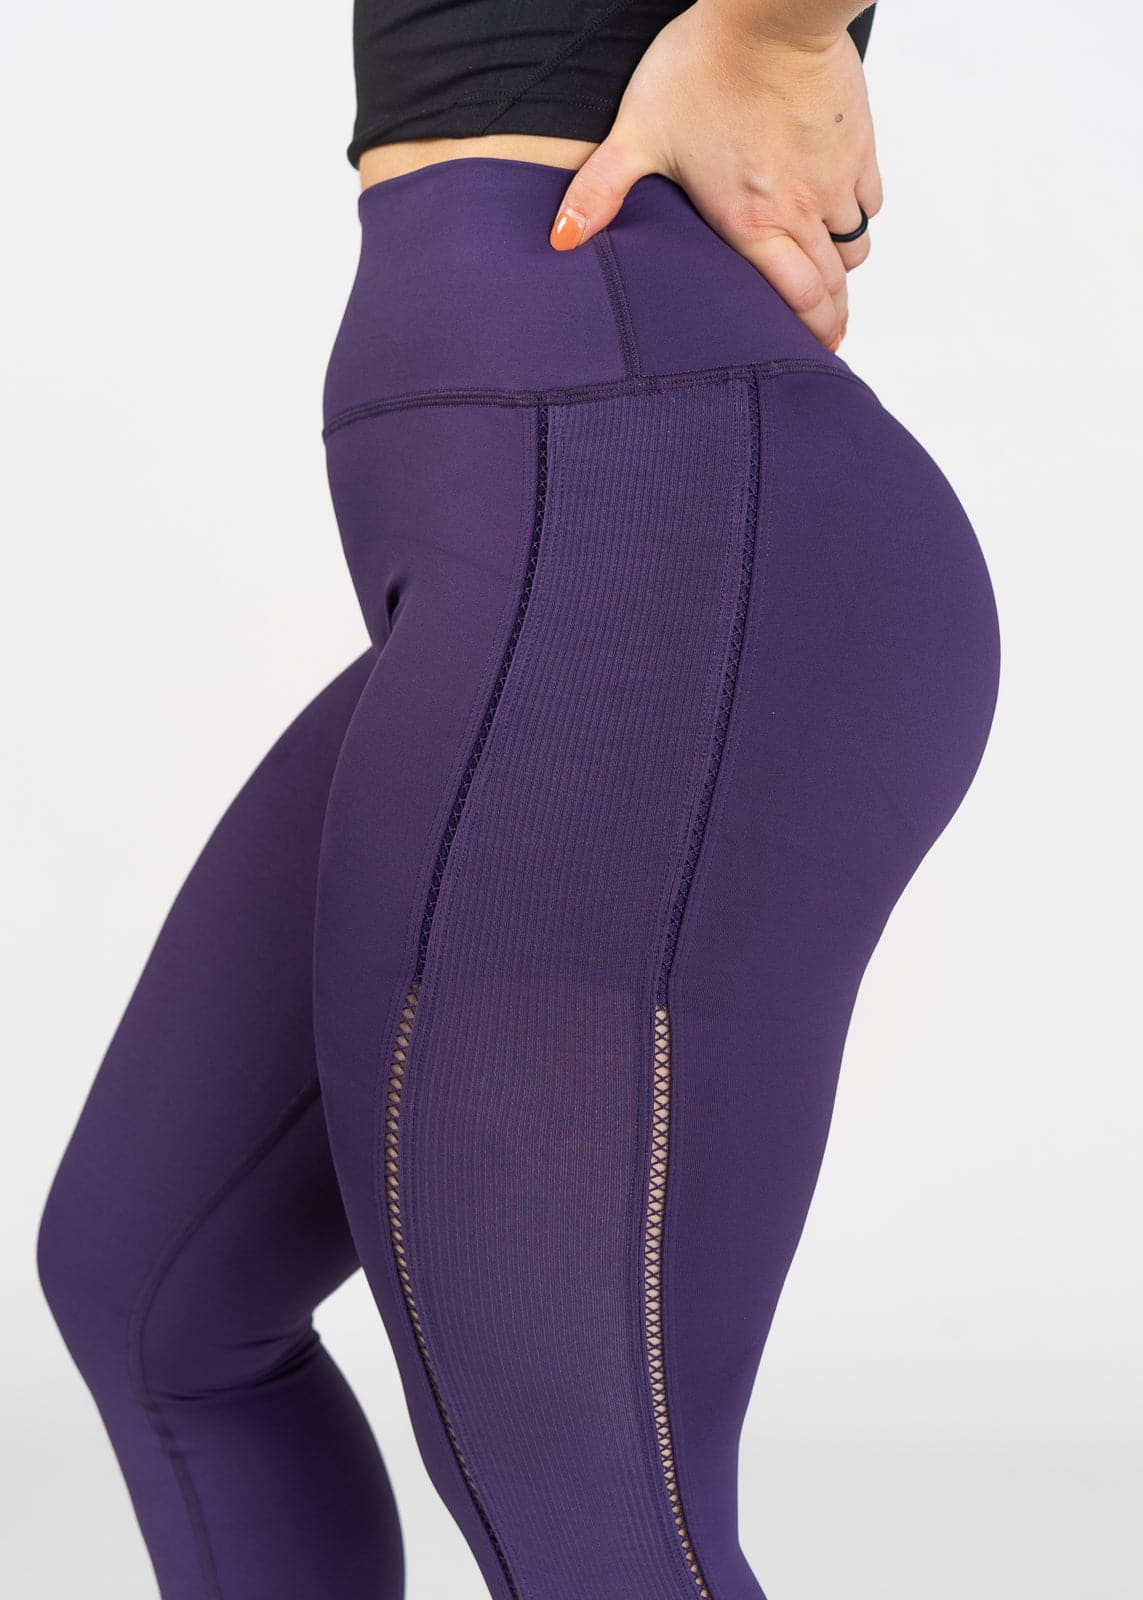 Chest to Shin Side View With Hands on Lower Back Wearing Empowered Leggings With Cut Outs | Purple